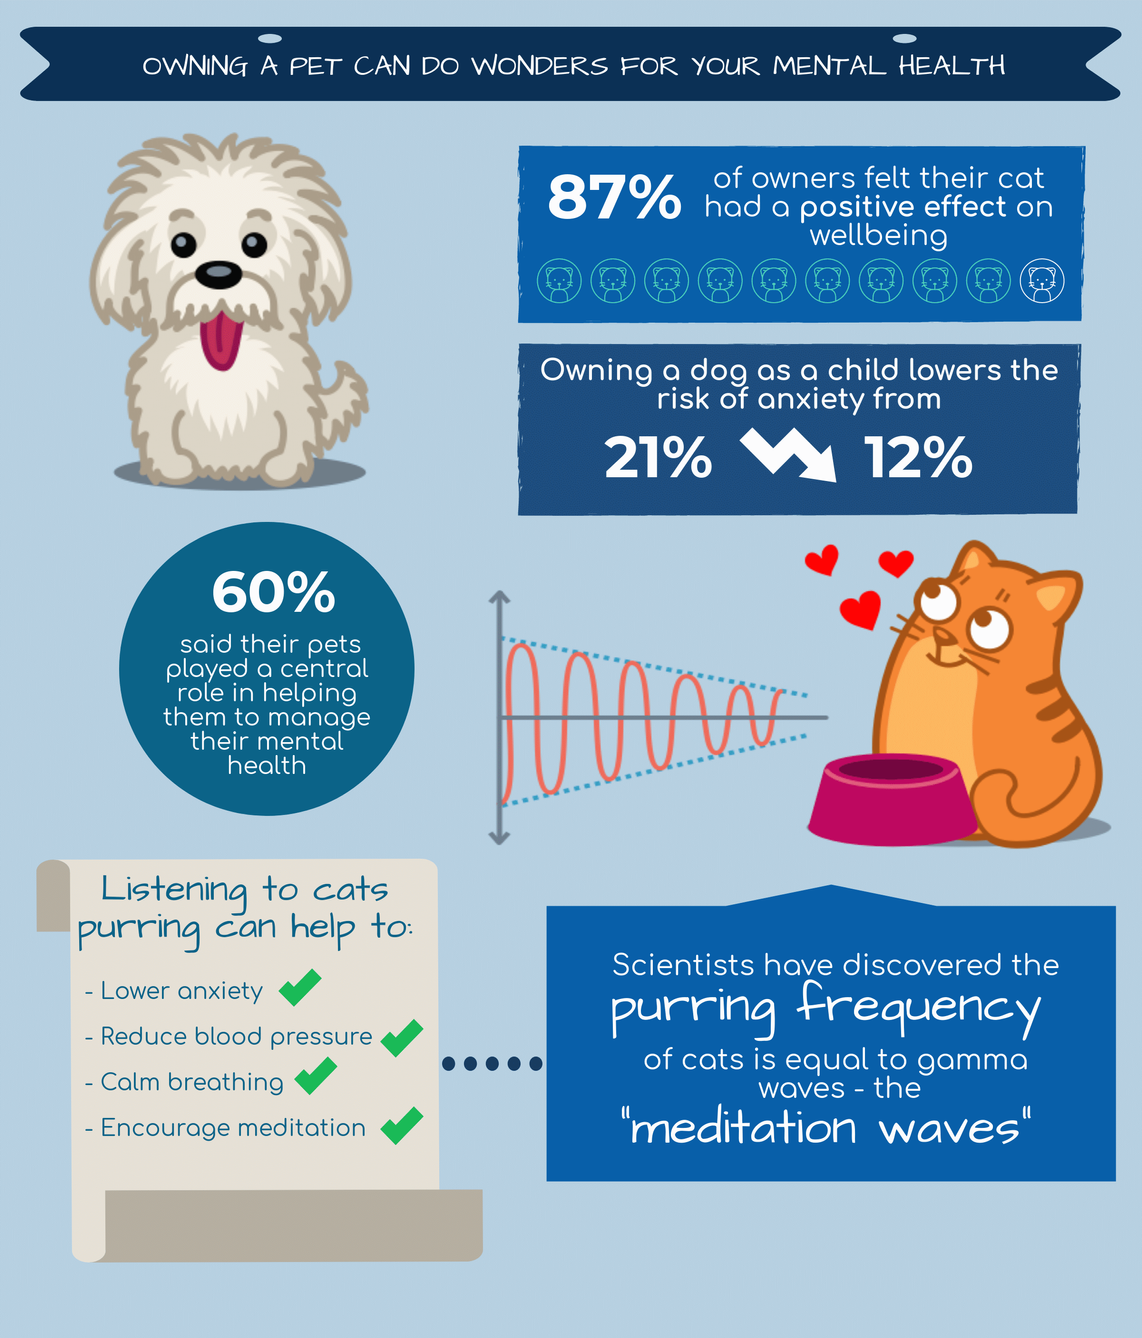 Owning a pet can do wonders for your mental health. 87% of owners felt their cat had a positive effect on wellbeing. Owning a dog as a child lowers the risk of anxiety from 21% to 12%. 60% said their pets played a central role in helping them to manage their mental health. Listening to cats purring can help to: lower anxiety; reduce blood pressure; calm breathing; encourage meditation. Scientists have discovered the purring frequency of cats is equal to gamma waves - the "meditation waves".